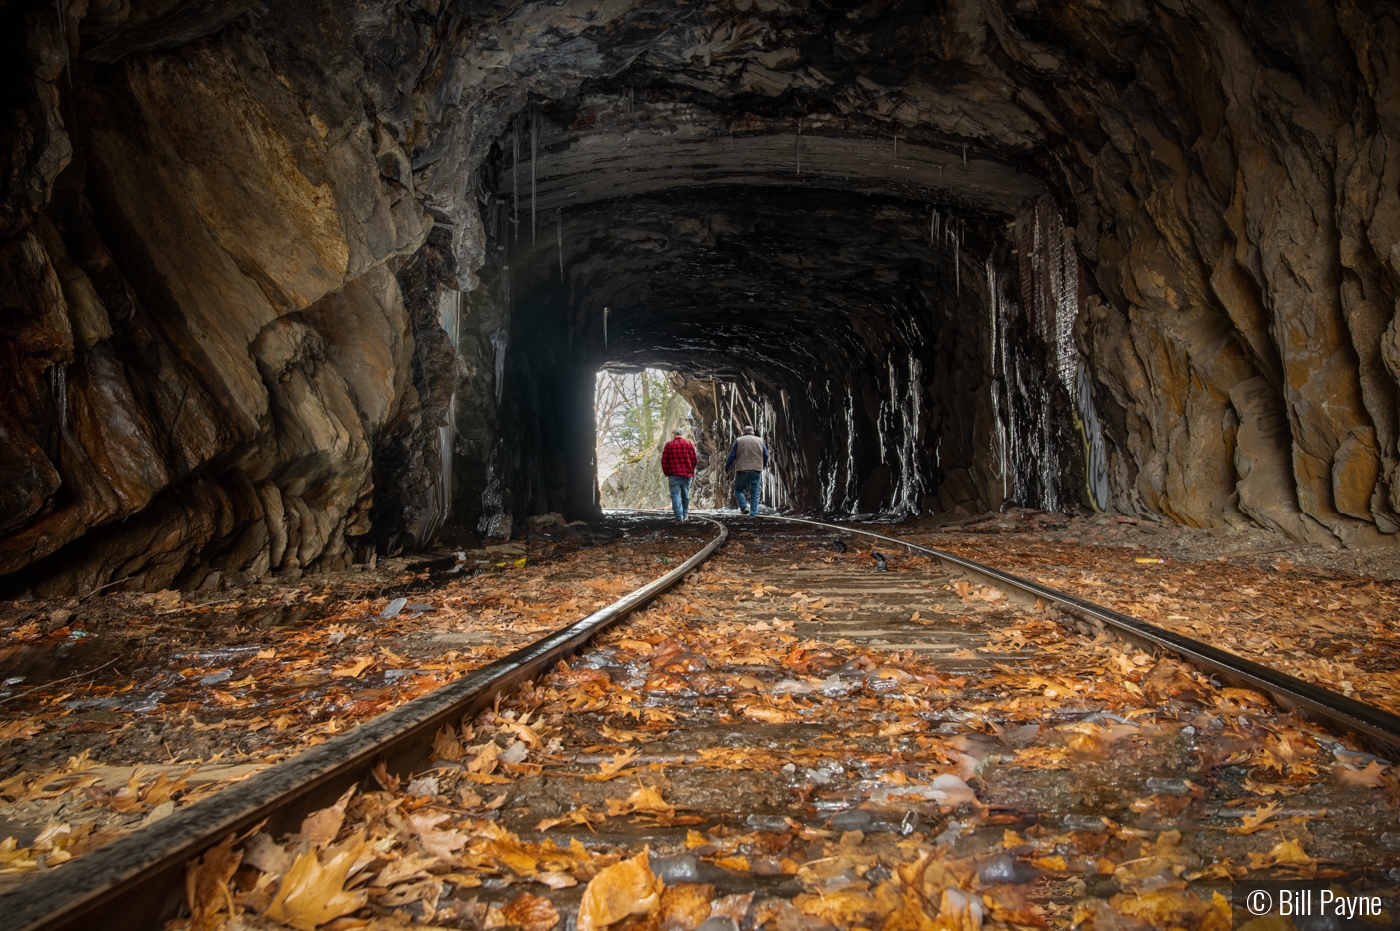 Two Travelers Trekking Through the Tunnel by Bill Payne